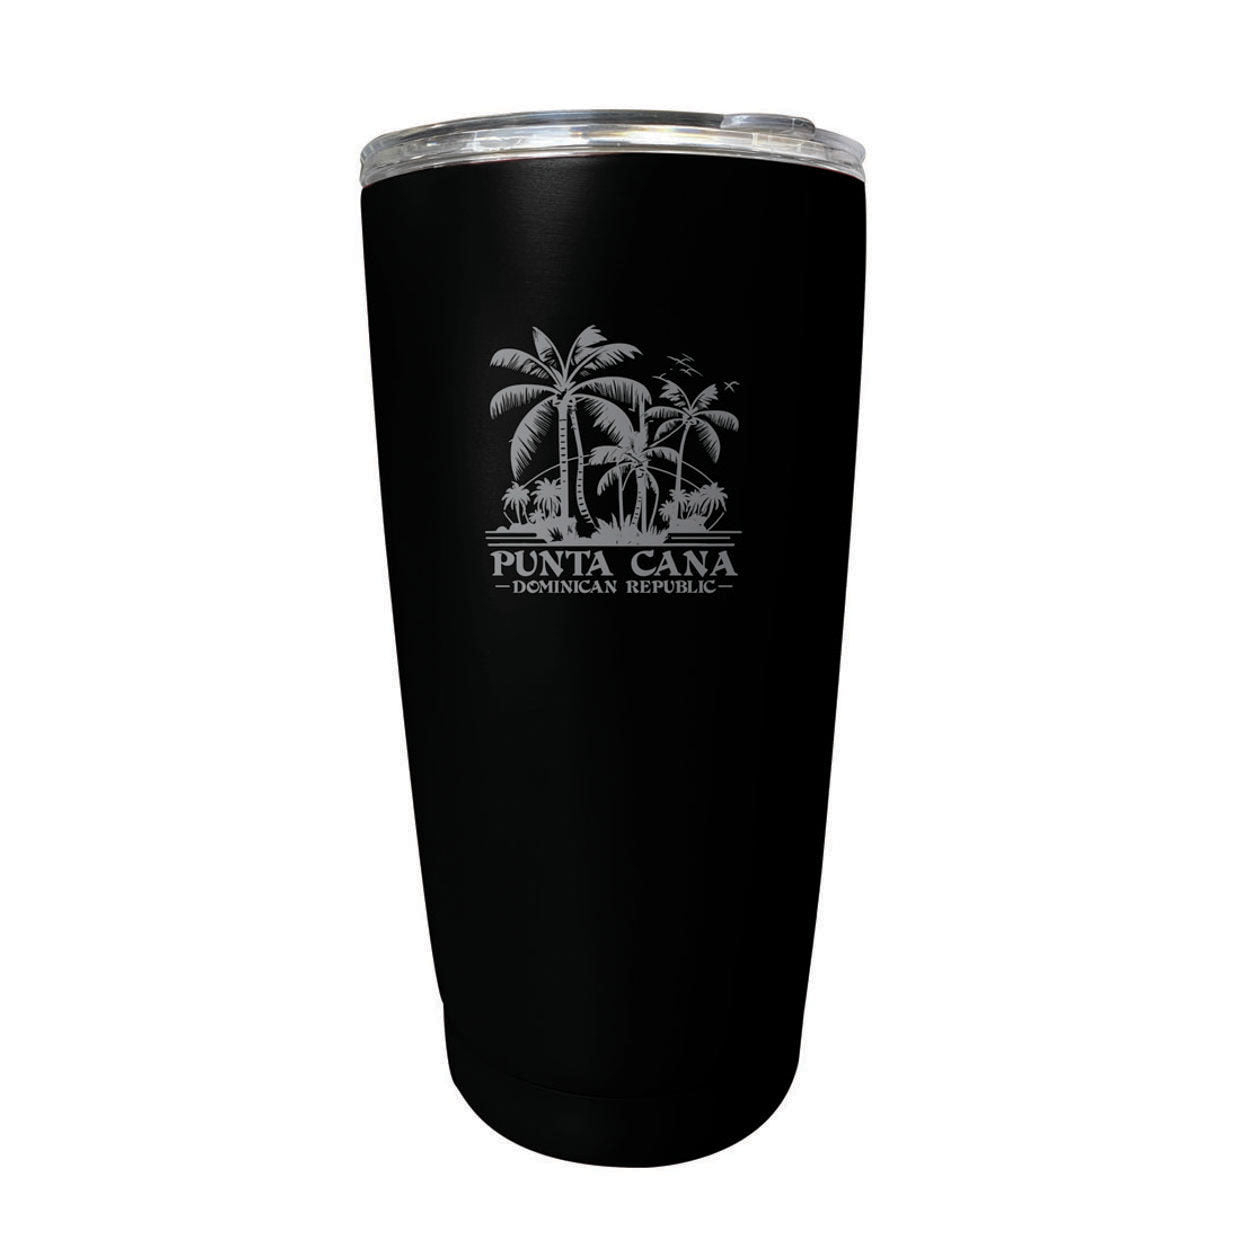 Punta Cana Dominican Republic Souvenir 16 Oz Stainless Steel Insulated Tumbler Etched - Green, PALMS